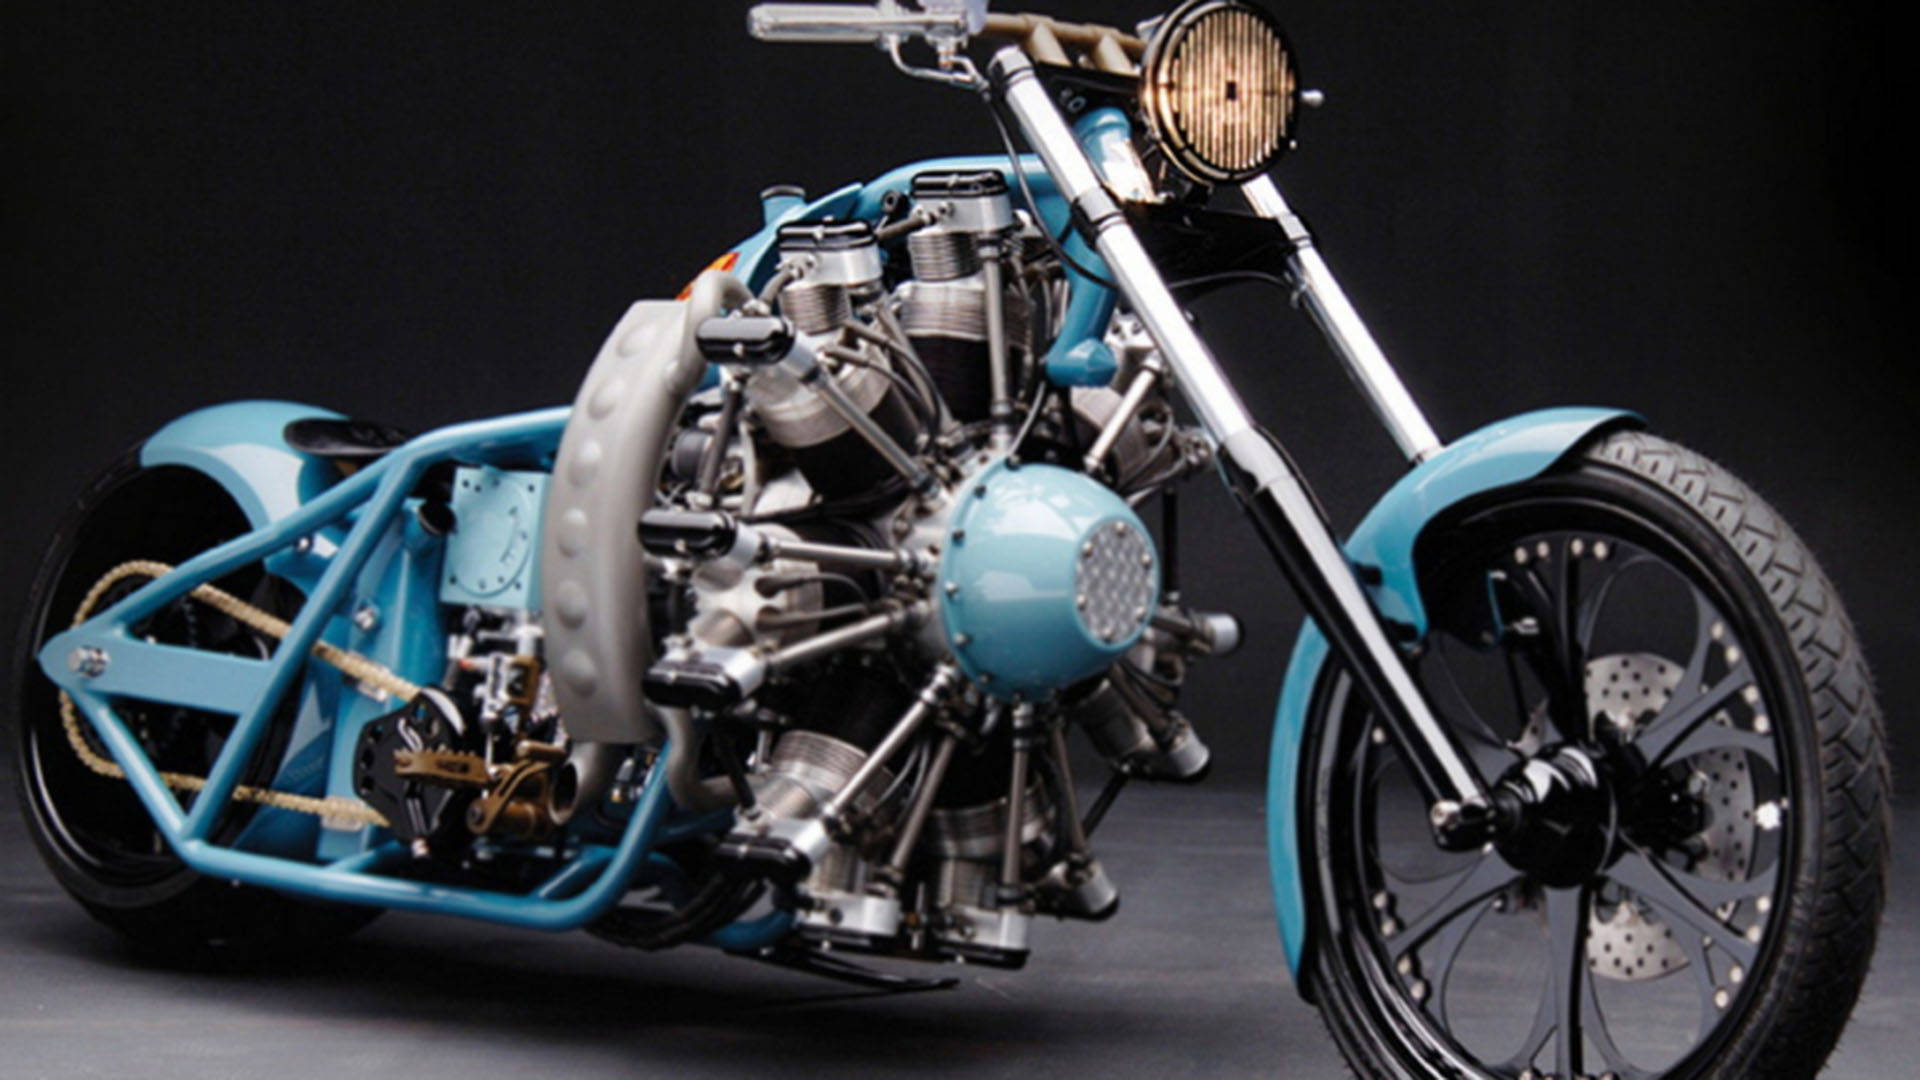 West Coast Choppers Motorcycle Engine Wallpaper